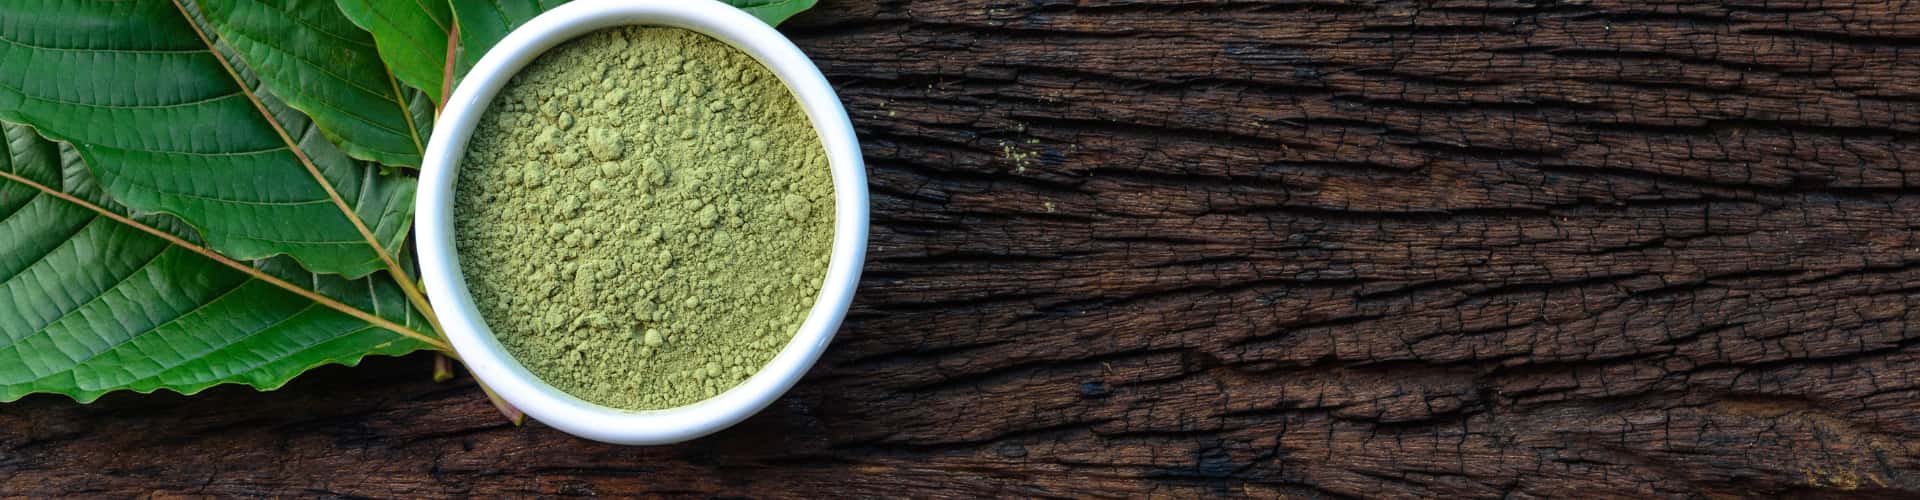 Kratom Powder: Uses, Effects, and More